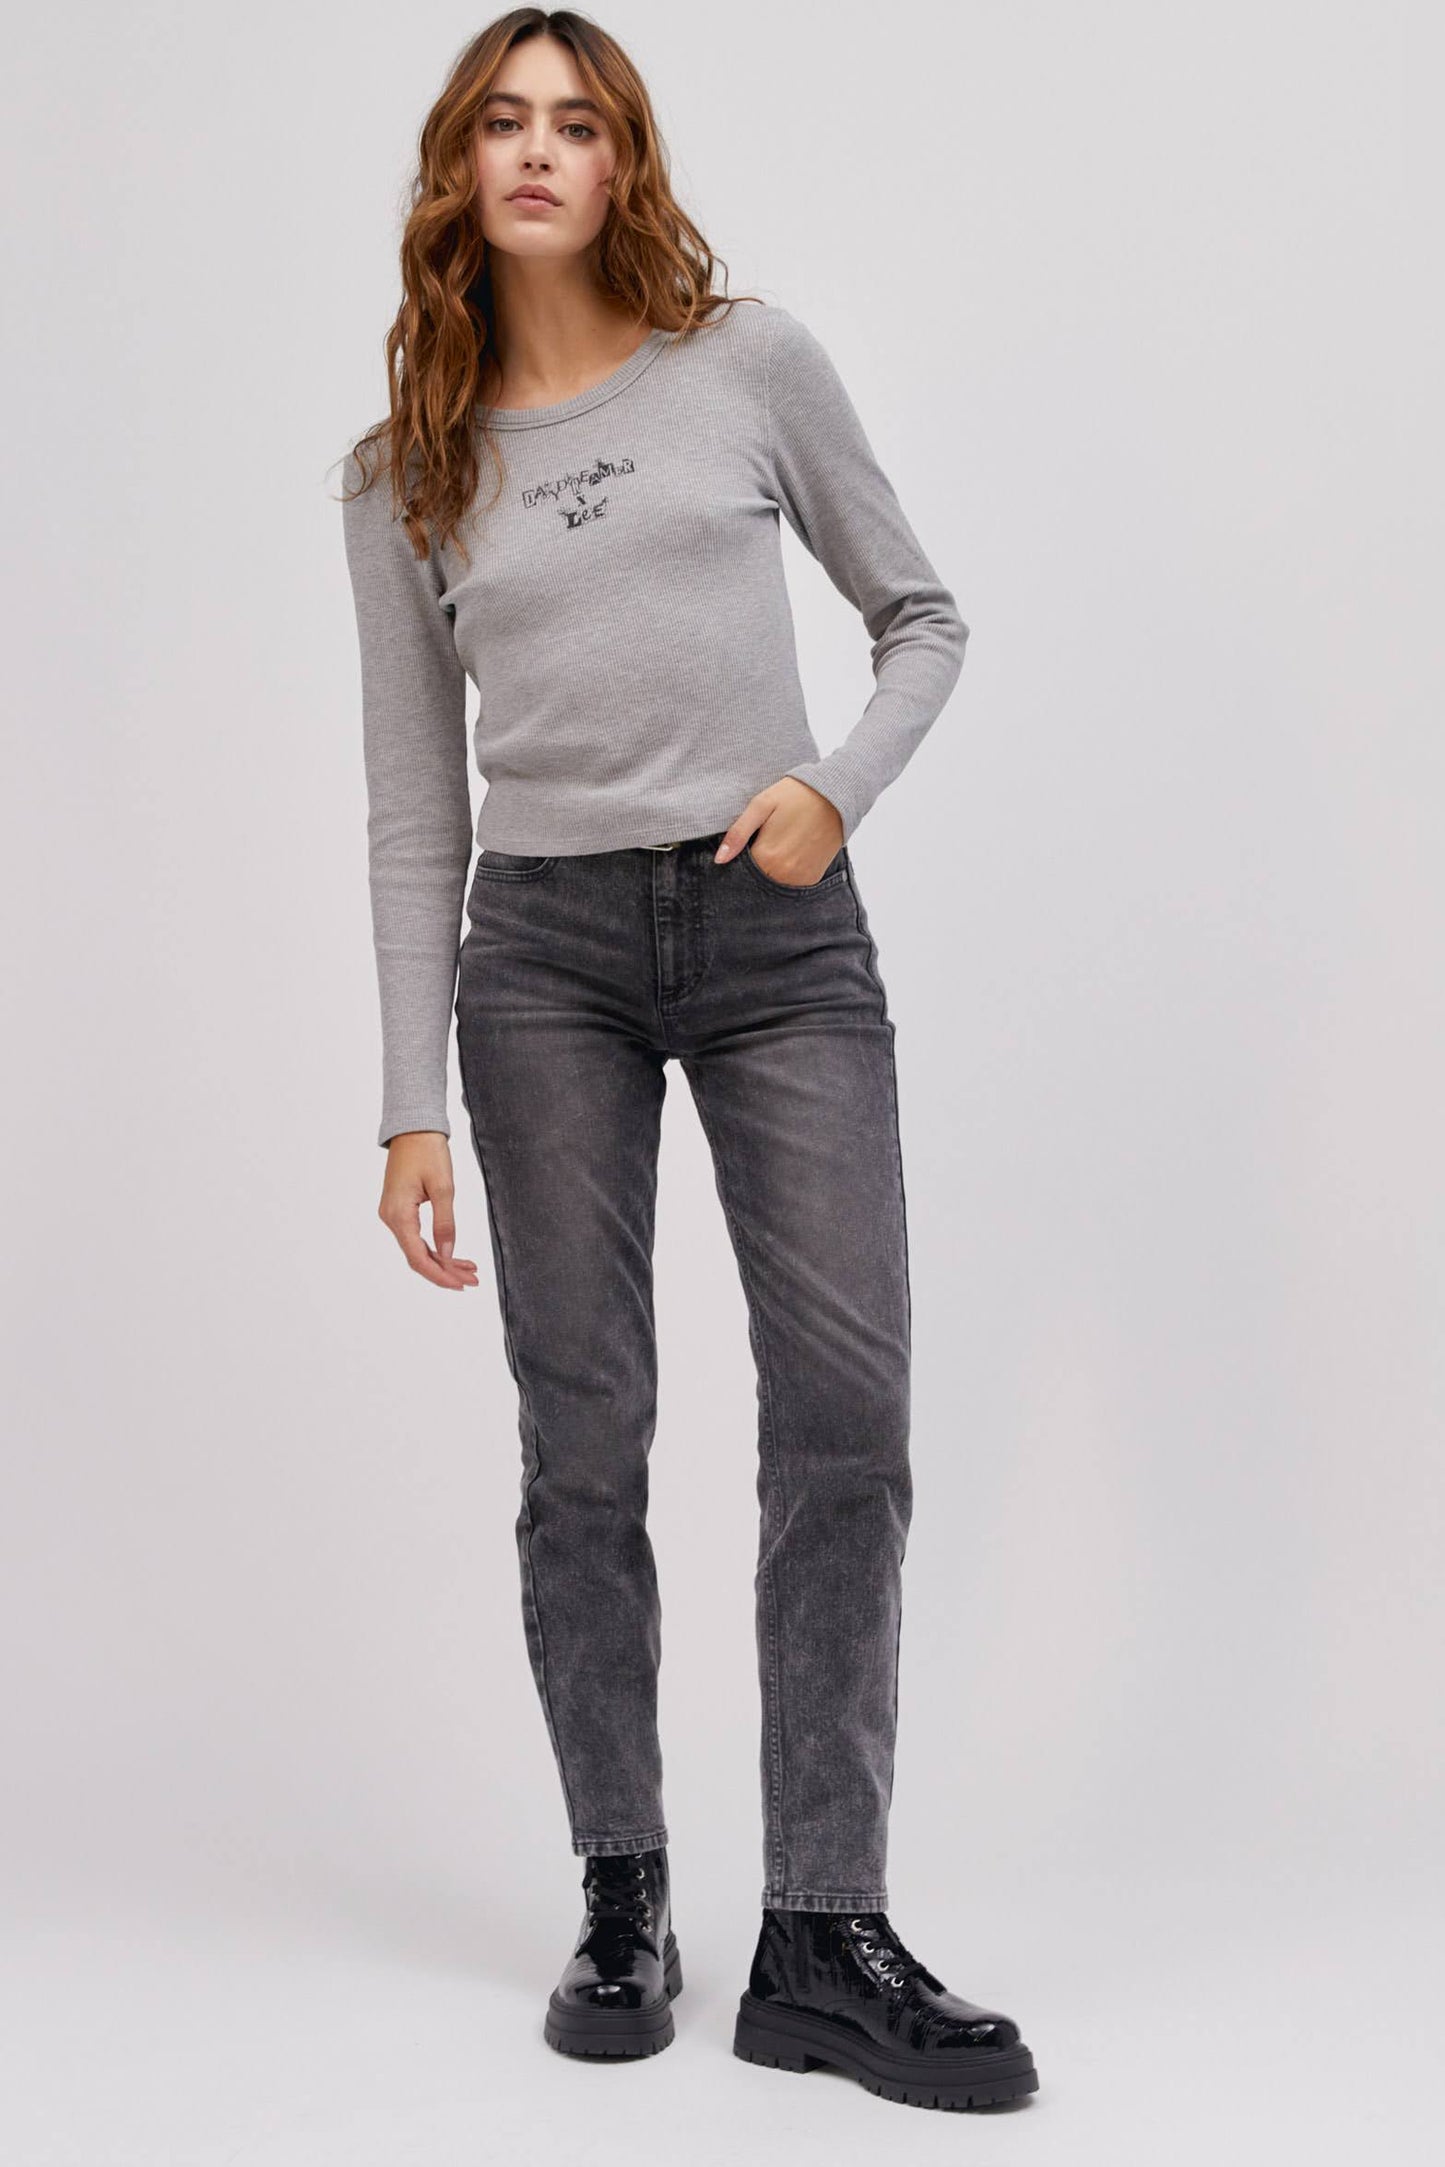 A curly-haired model featuring a heather grey colored shrunken thermal made with a slim fit, a cropped length, and designed with 'Daydreamer x Lee' in an original cut - paste style treatment accented with hand drawn graphic details.